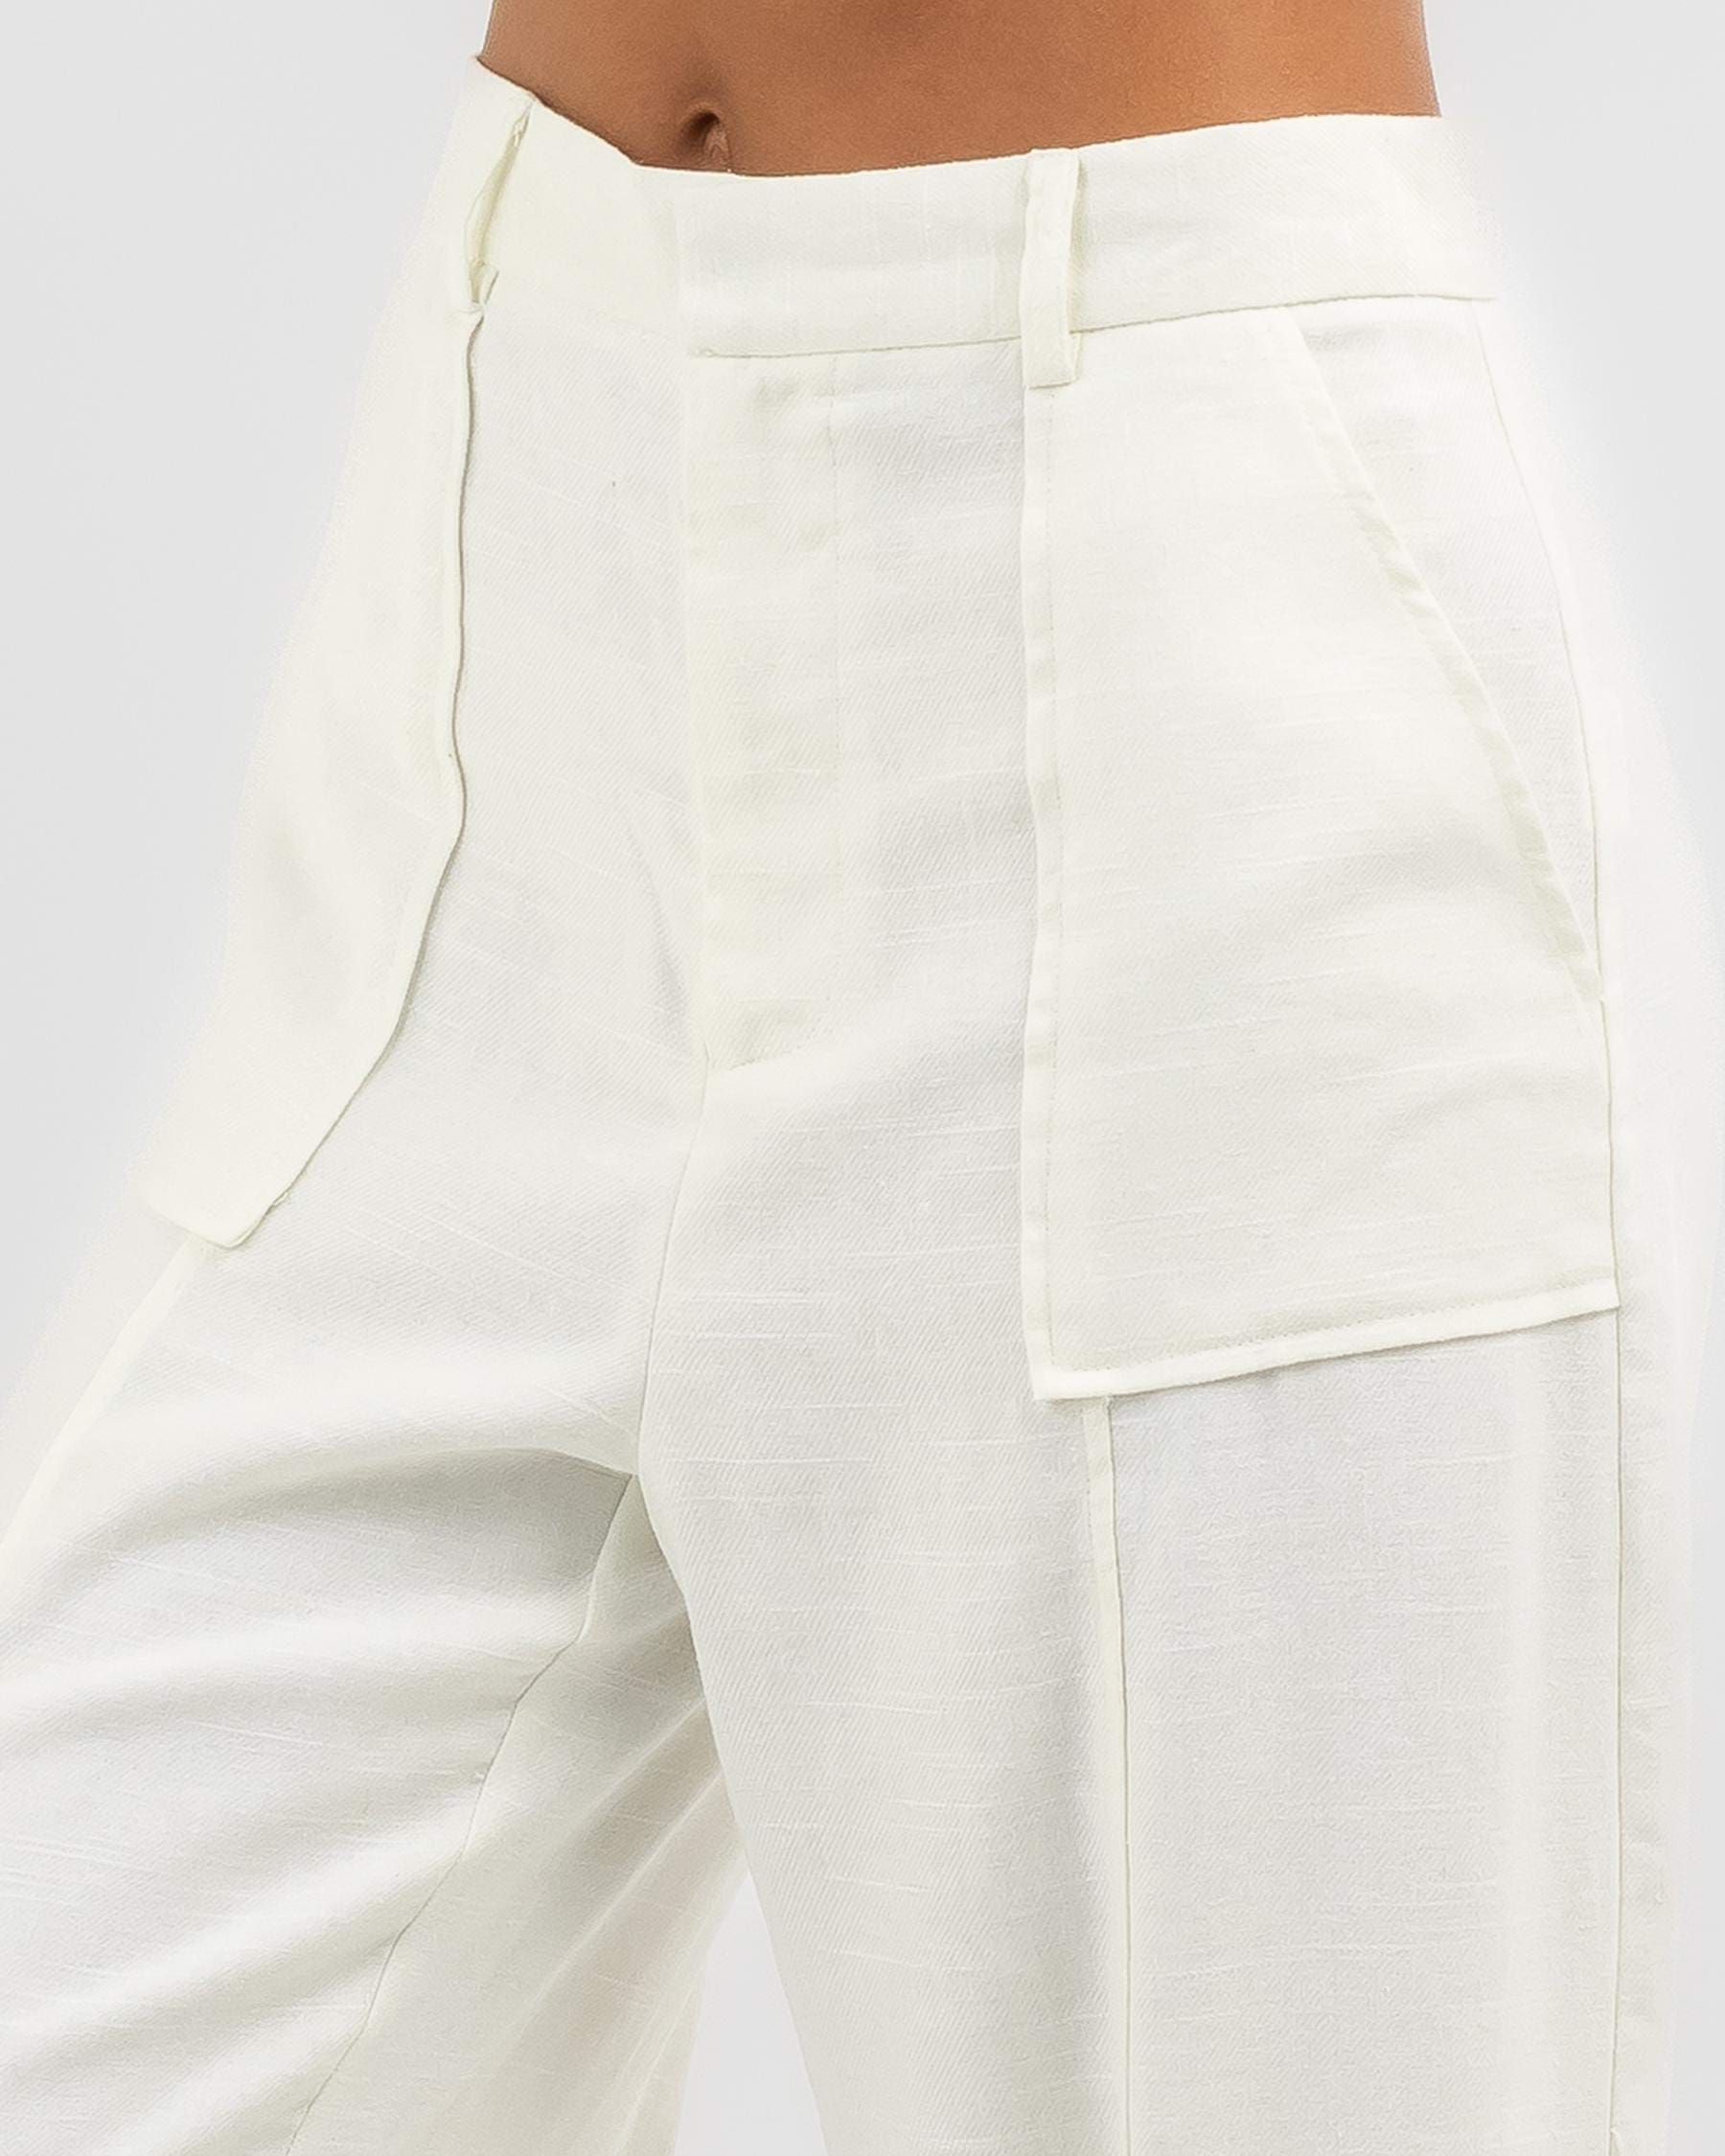 Shop YH & Co Mina Pants In White - Fast Shipping & Easy Returns - City ...